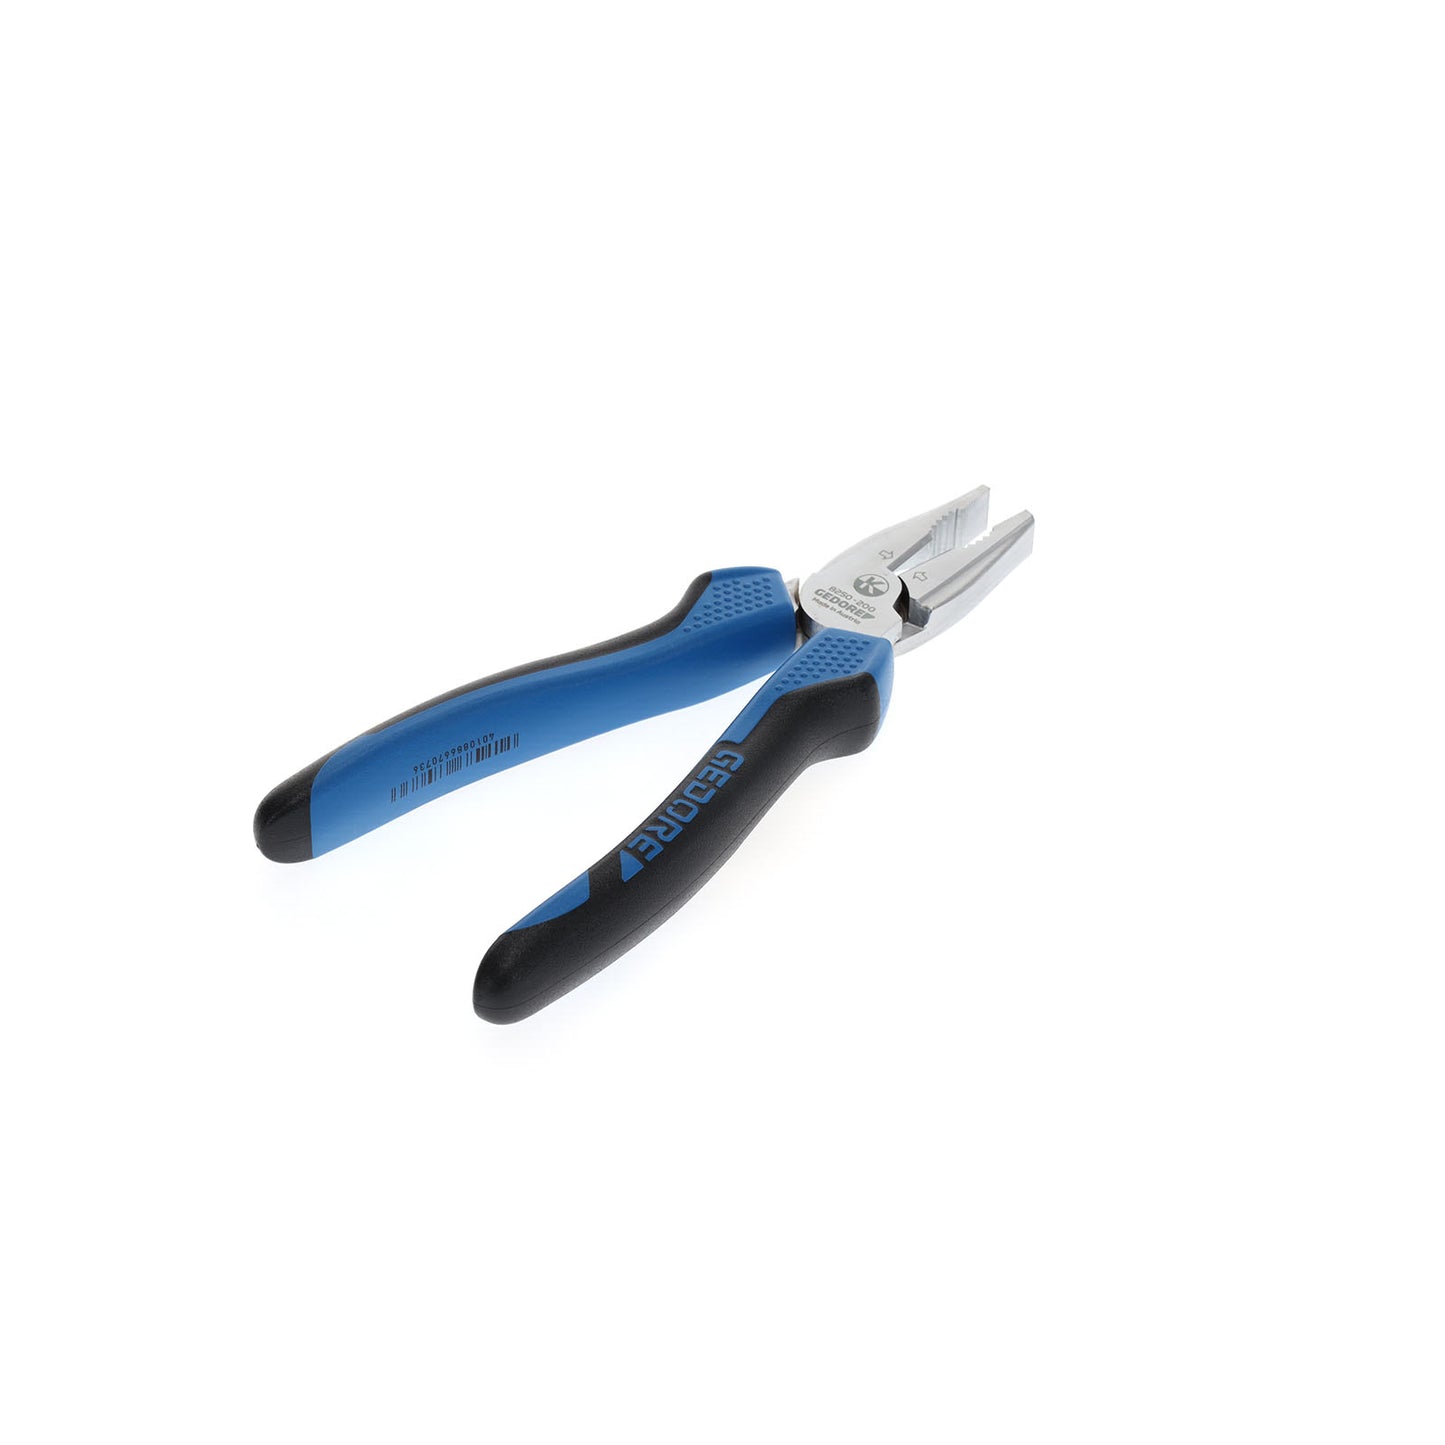 GEDORE 8250-200 JC - Univ force pliers 200 mm (6707310)